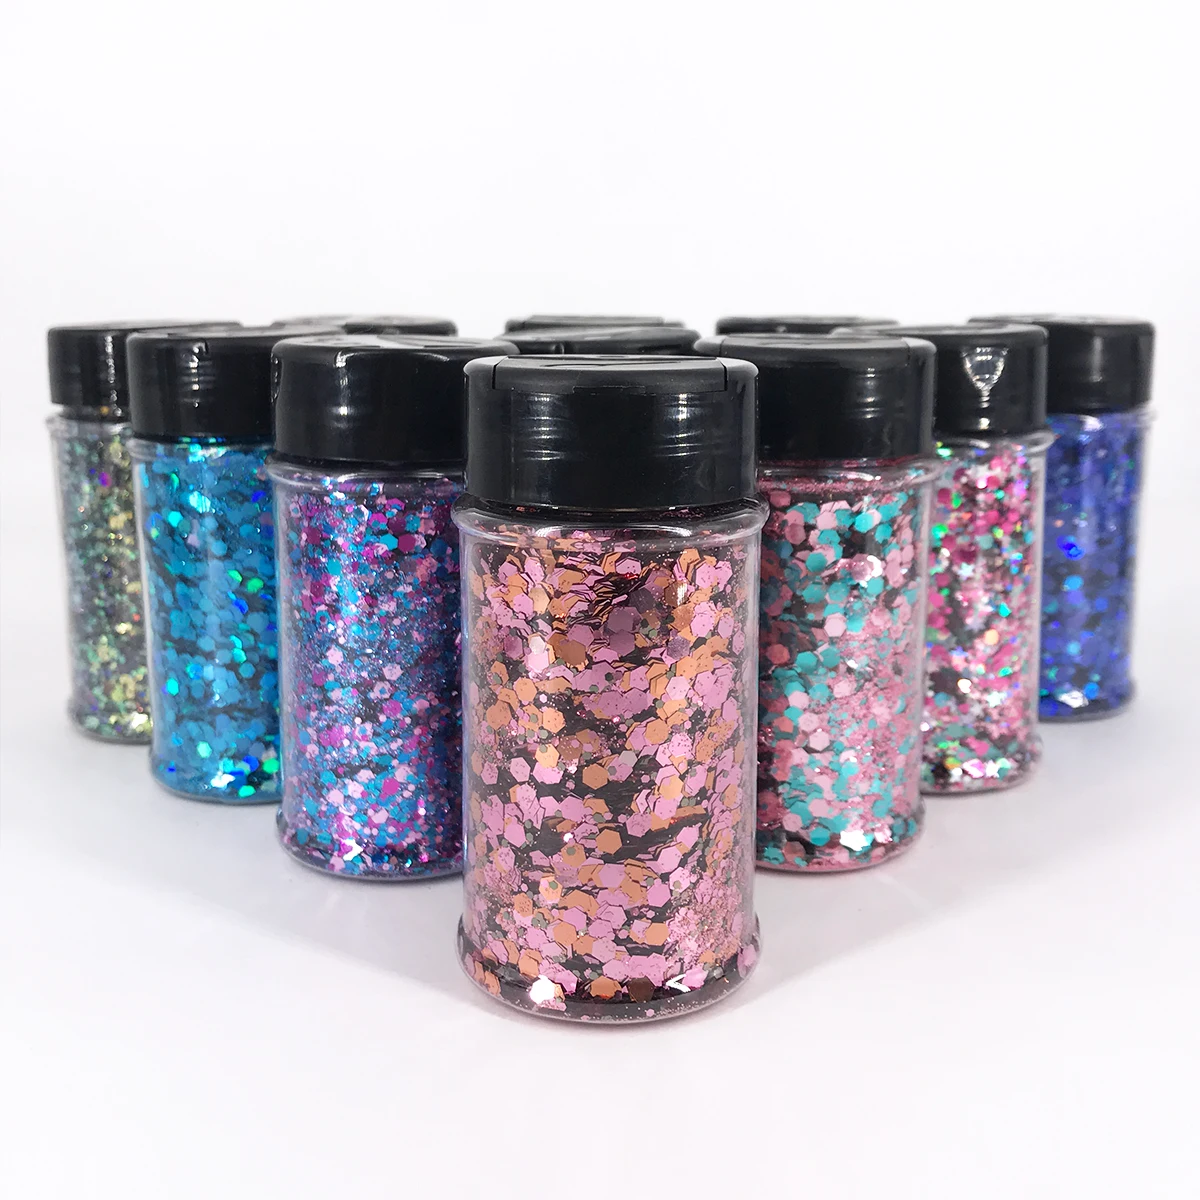 

2 oz Chameleon Holographic Chunky Mixed Sequins Powder Makeup Polyester Face Body Nail Art Glitter Shaker Craft Decation